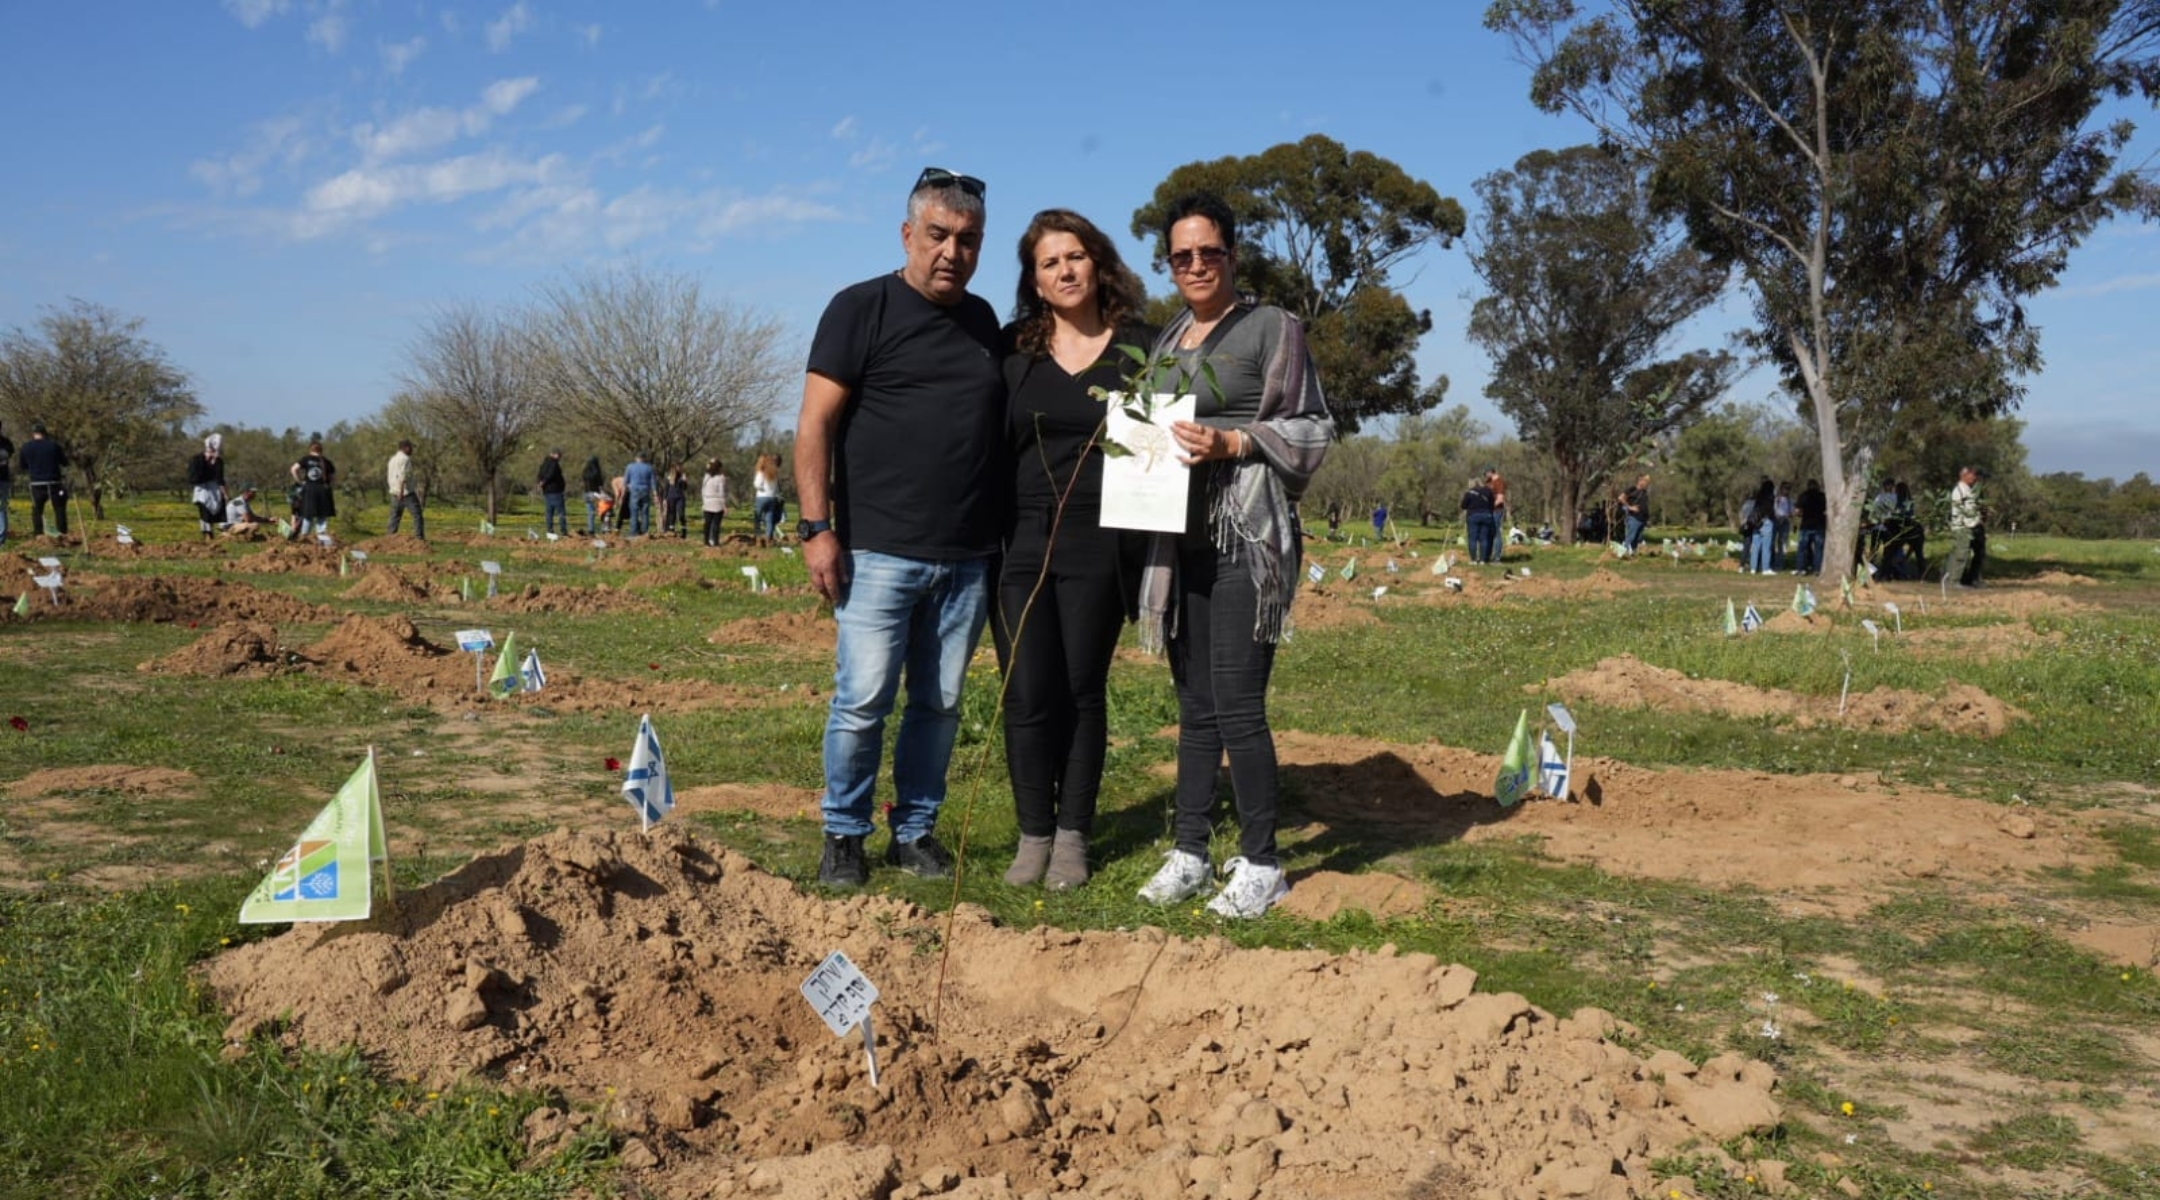 KKL-JNF Chair Ifat Ovadia-Luski with Doron and Meirav Madar, the parents of Shahak Yosef Madar, who was killed on Oct. 7, plant eucalyptus trees in honor of the victims of the Re’im massacre. (Yossi Ifergan/KKL-JNF Archive)